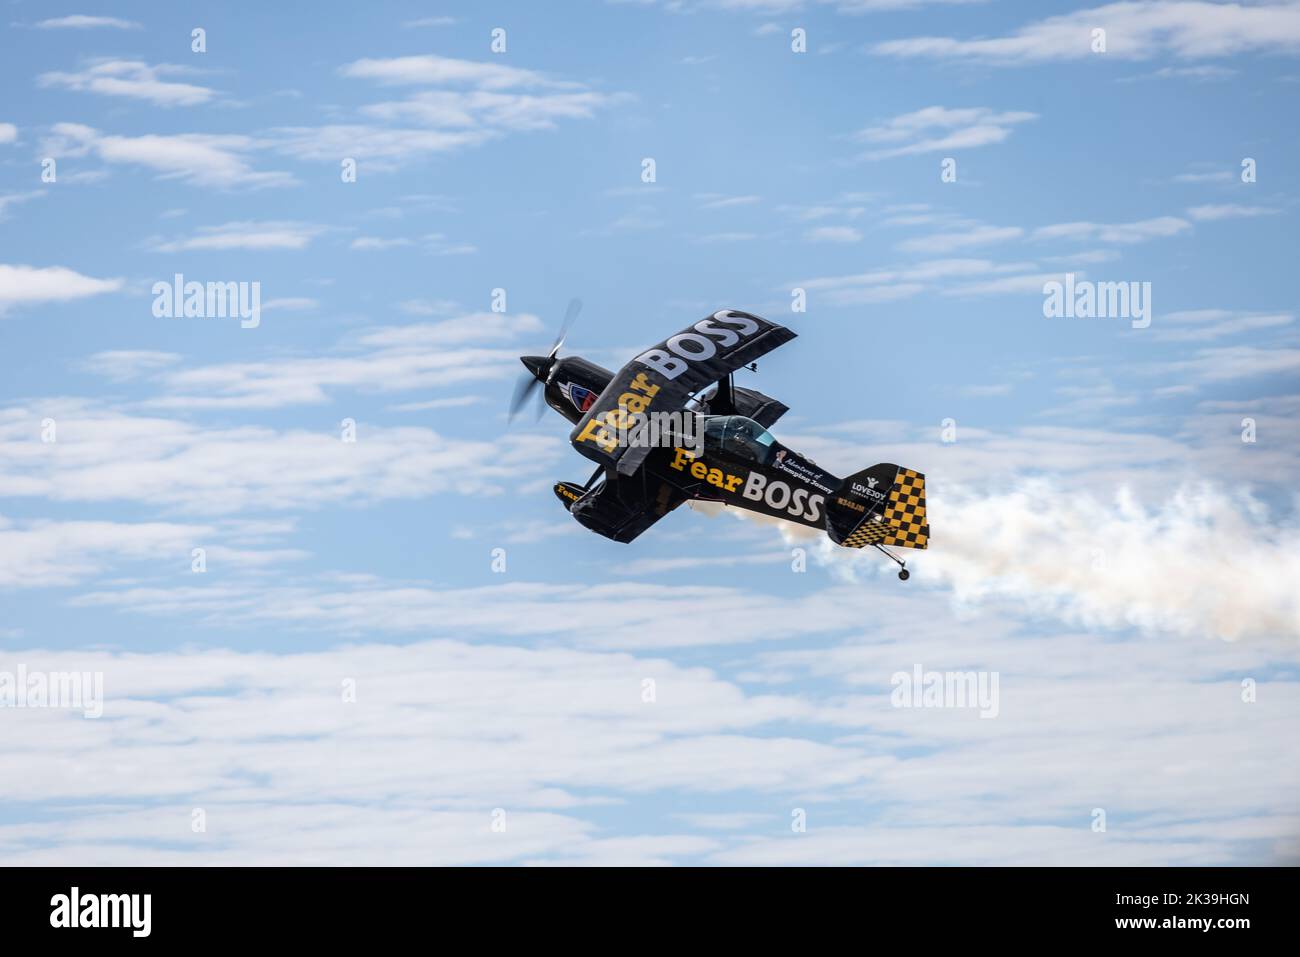 Jon Melby, piloting his Pitts S-1B Muscle Bi-Plane, performs aerobatics during the 2022 Marine Corps Air Station Miramar Air Show at MCAS Miramar, San Diego, California, Sept. 24, 2022. Melby has been performing at air shows since 2001. The theme for the 2022 MCAS Miramar Air Show, “Marines Fight, Evolve and Win,” reflects the Marine Corps’ ongoing modernization efforts to prepare for future conflicts. (U.S. Marine Corps photo by Cpl. Brienna Tuck) Stock Photo